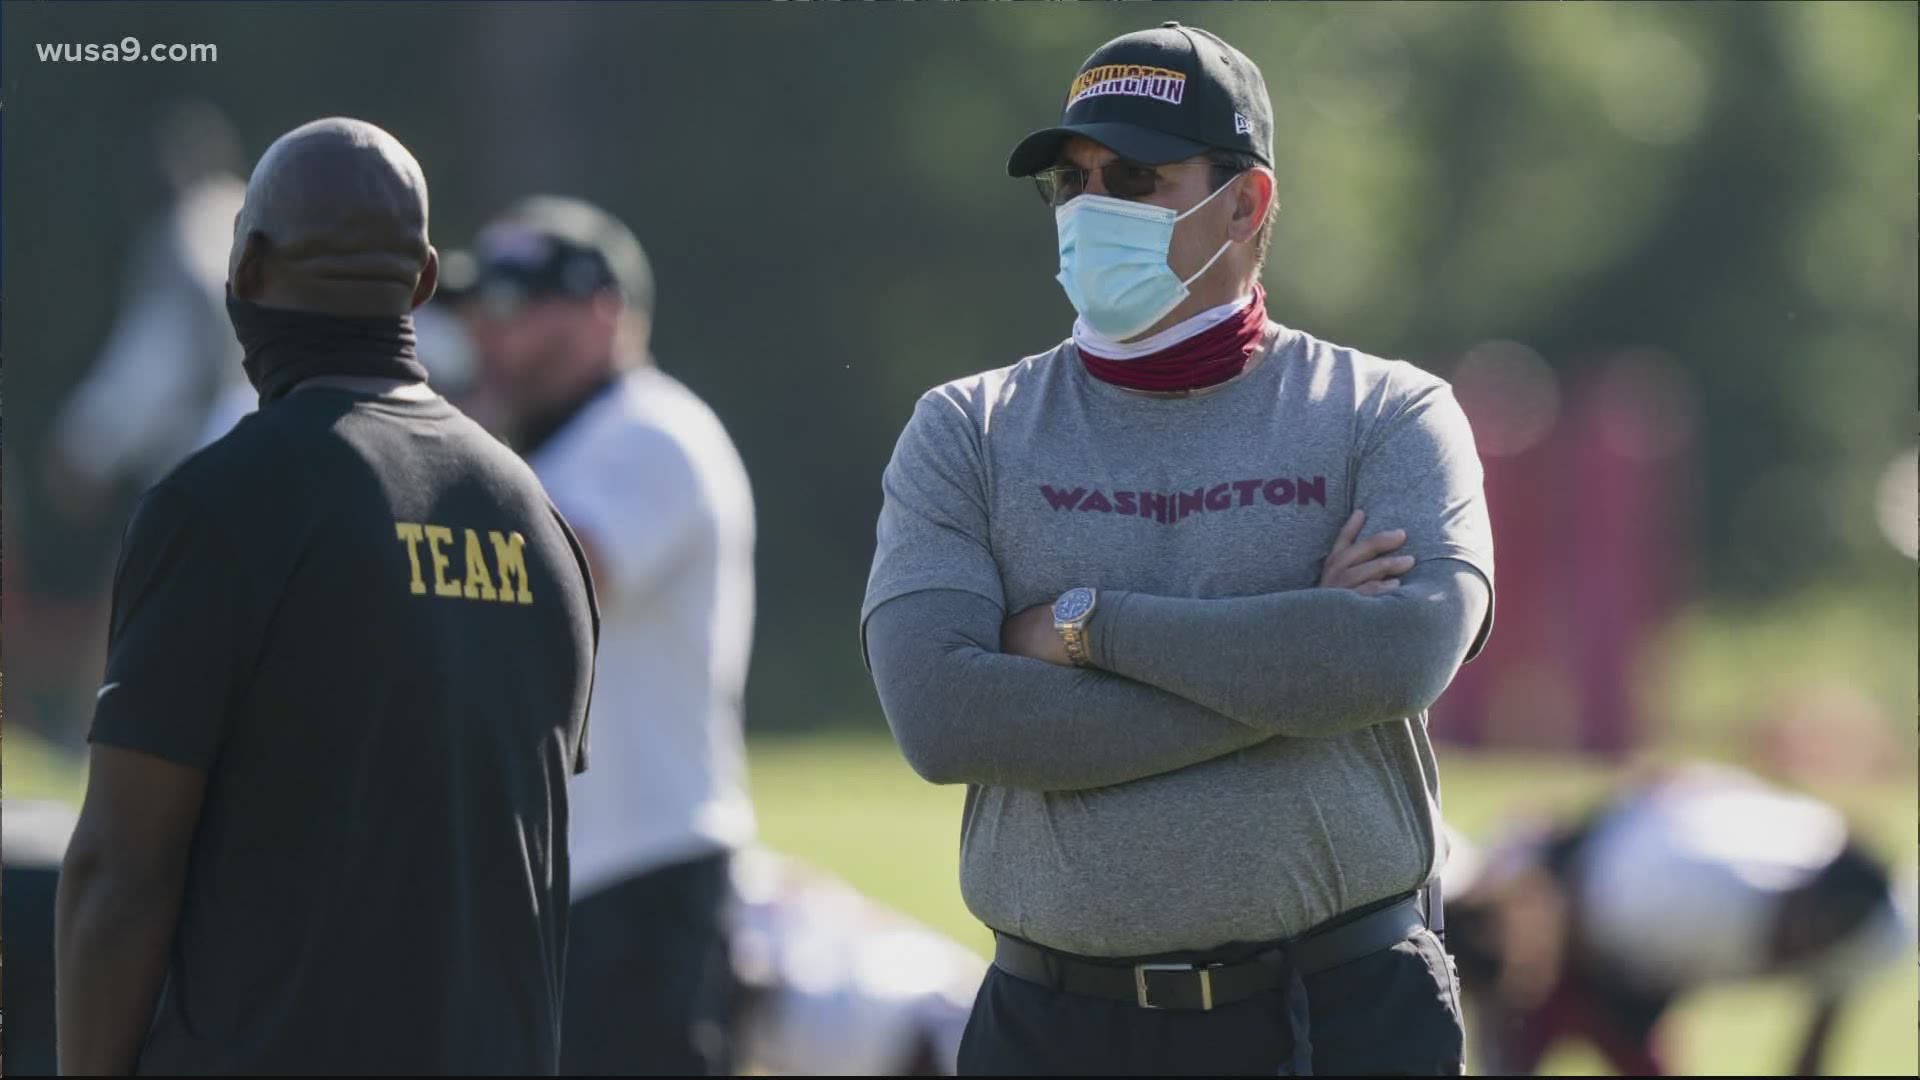 Weeks before his first season with Washington is expected to begin, coach Rivera said he was diagnosed with "very treatable and curable" cancer.